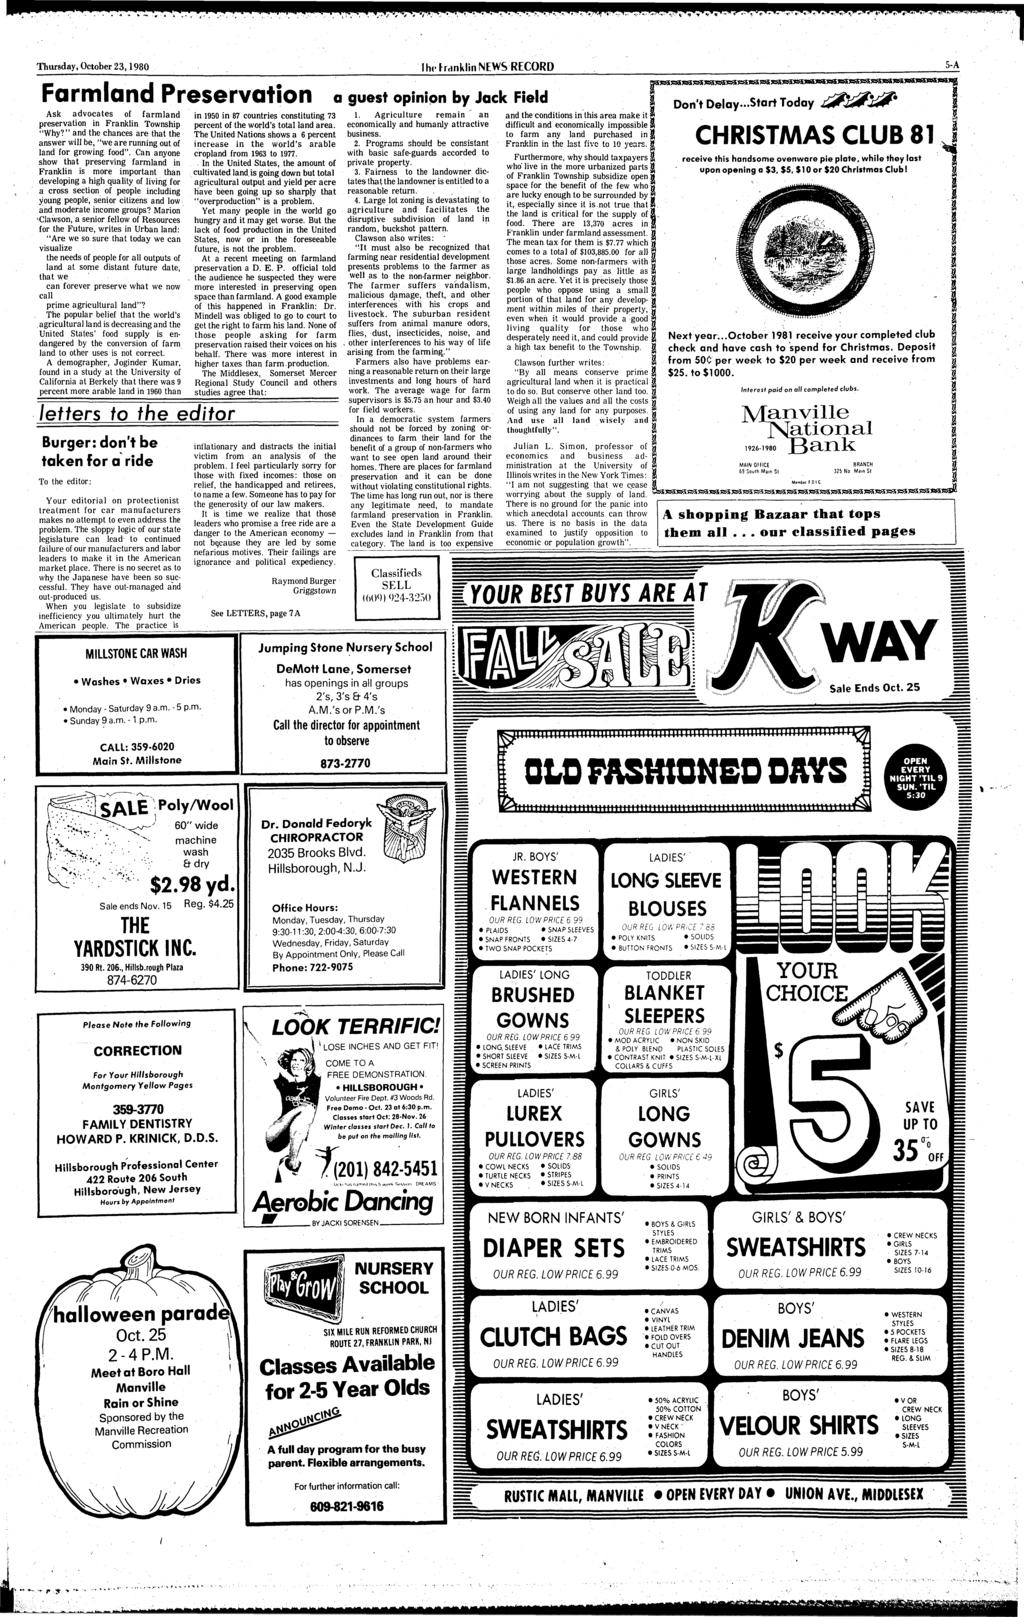 Thursday, October 23,1980 I he Franklin NEWS RECORD 5-A Farmland Preservation Ask advocates of farmland preservation in Franklin Township "Why?